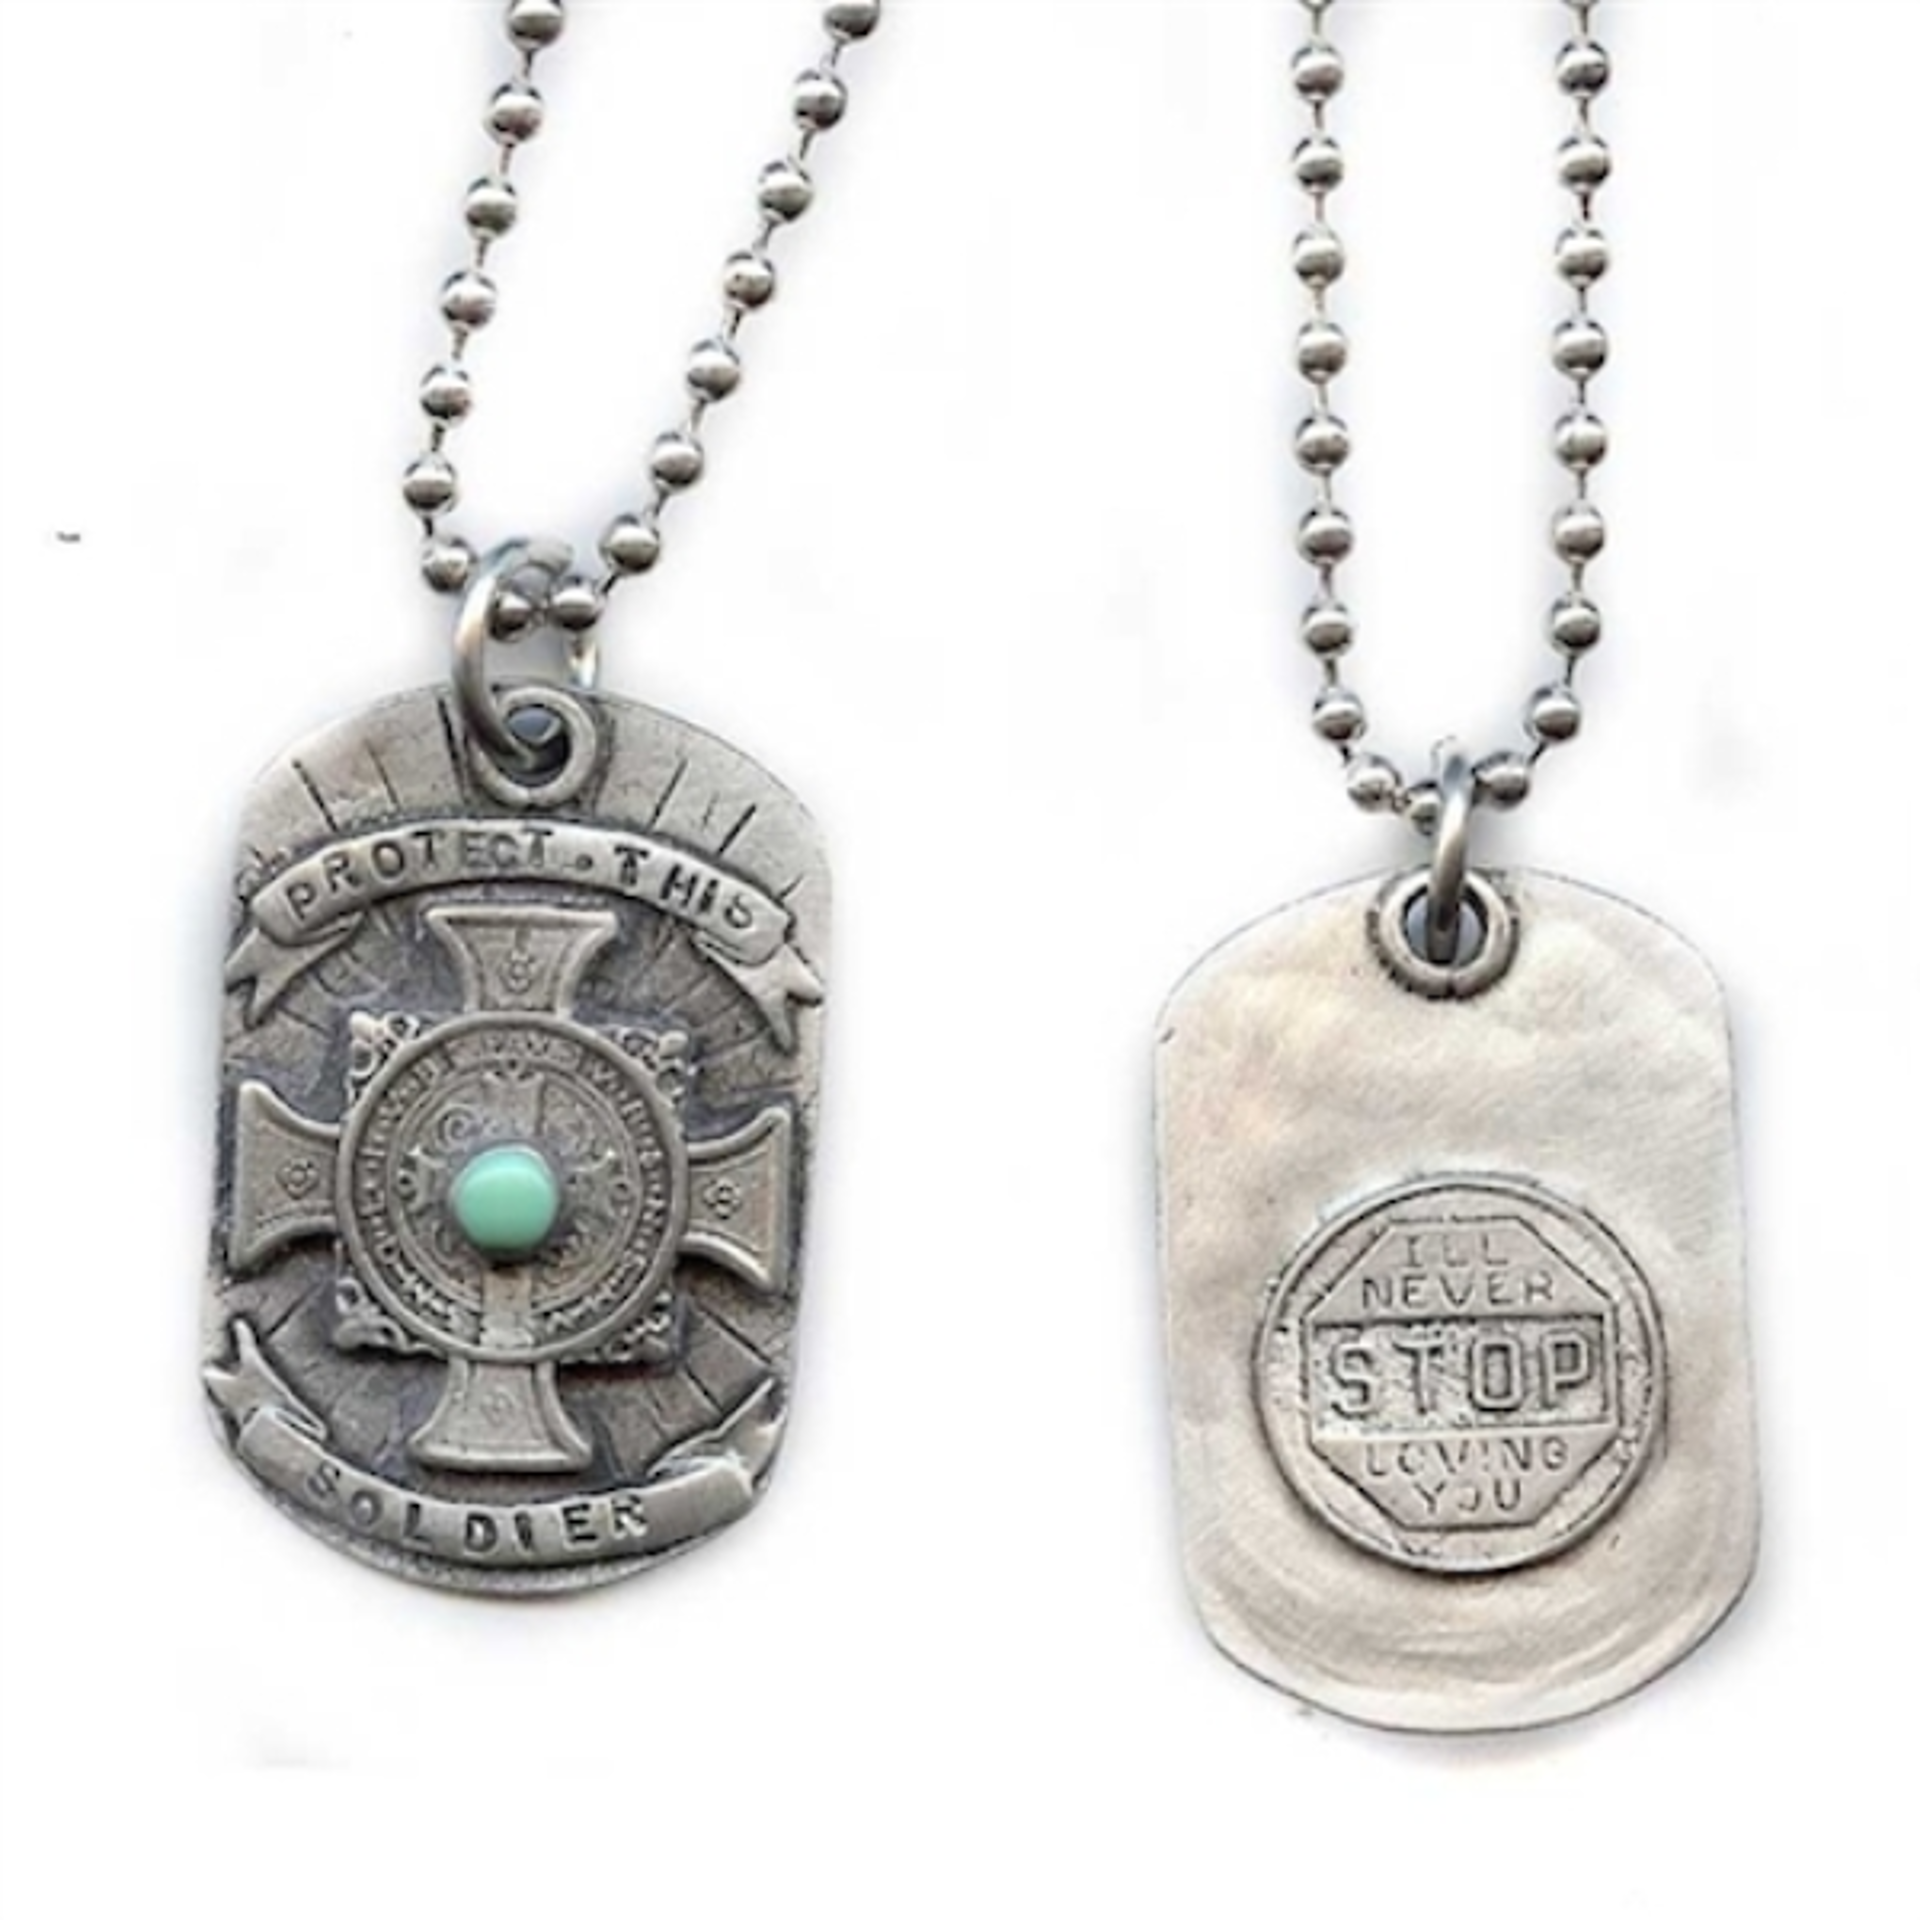 Necklace - 18" Pewter - Protect This Soldier by Indigo Desert Ranch - Jewelry